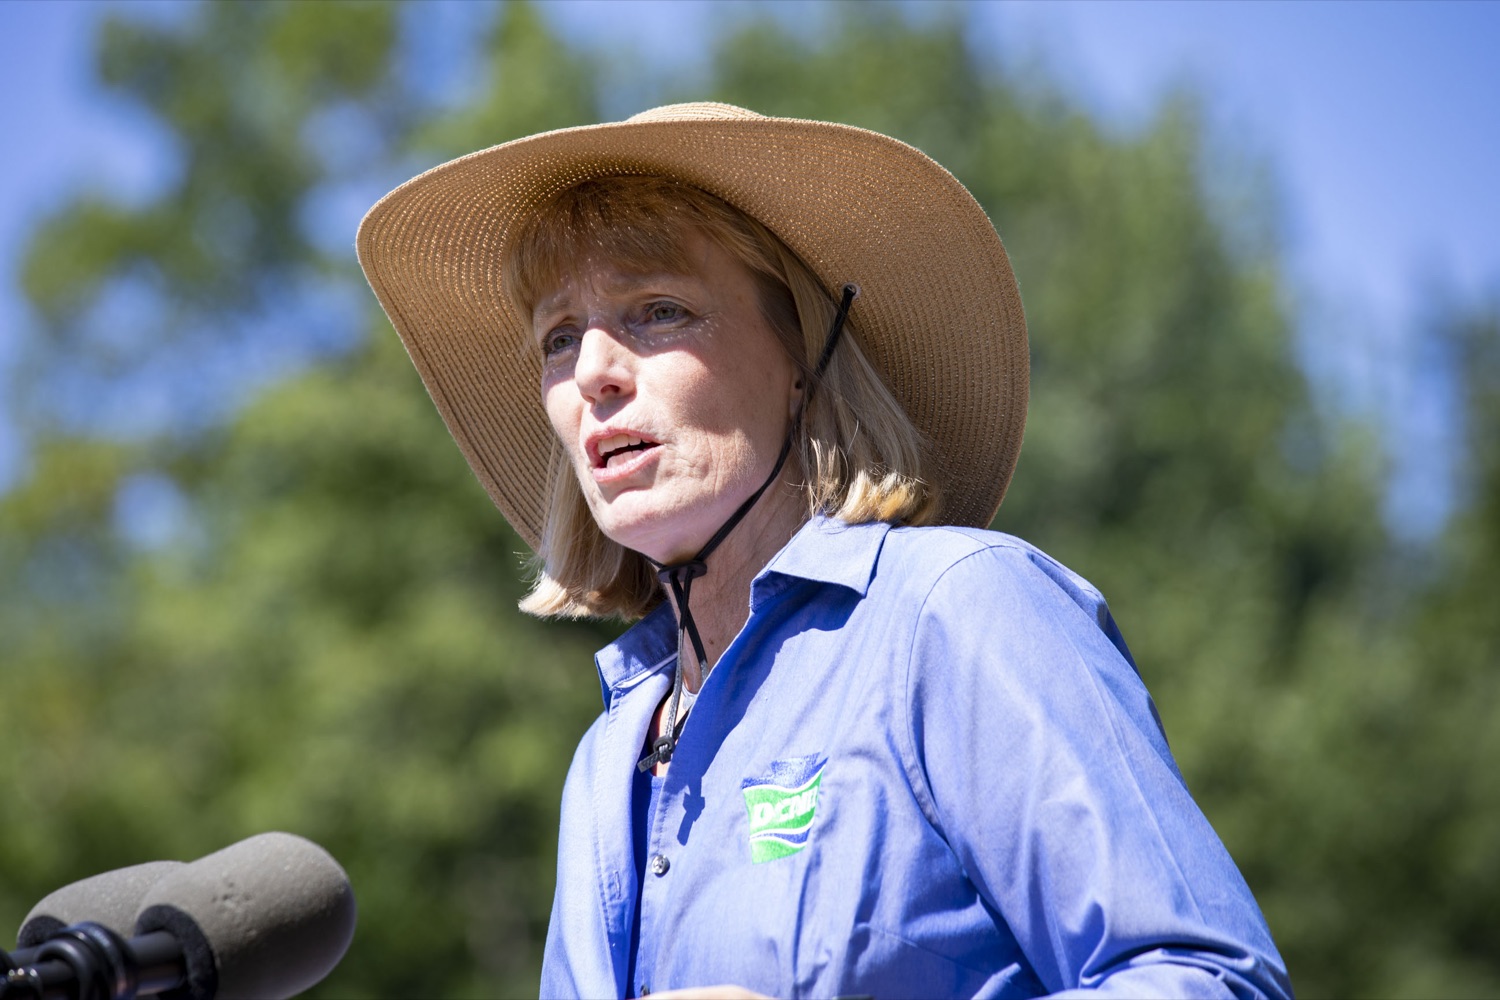 DCNR Secretary Cindy Adams Dunn announces a new motorized recreation area in Weiser State Forest District that will expand opportunities for ATVs, dirt bikes, off-highway vehicles, and other forms of recreation  in McAdoo, PA on August 12, 2022.<br><a href="https://filesource.amperwave.net/commonwealthofpa/photo/22090_dcnr_RecreationArea_17.jpg" target="_blank">⇣ Download Photo</a>